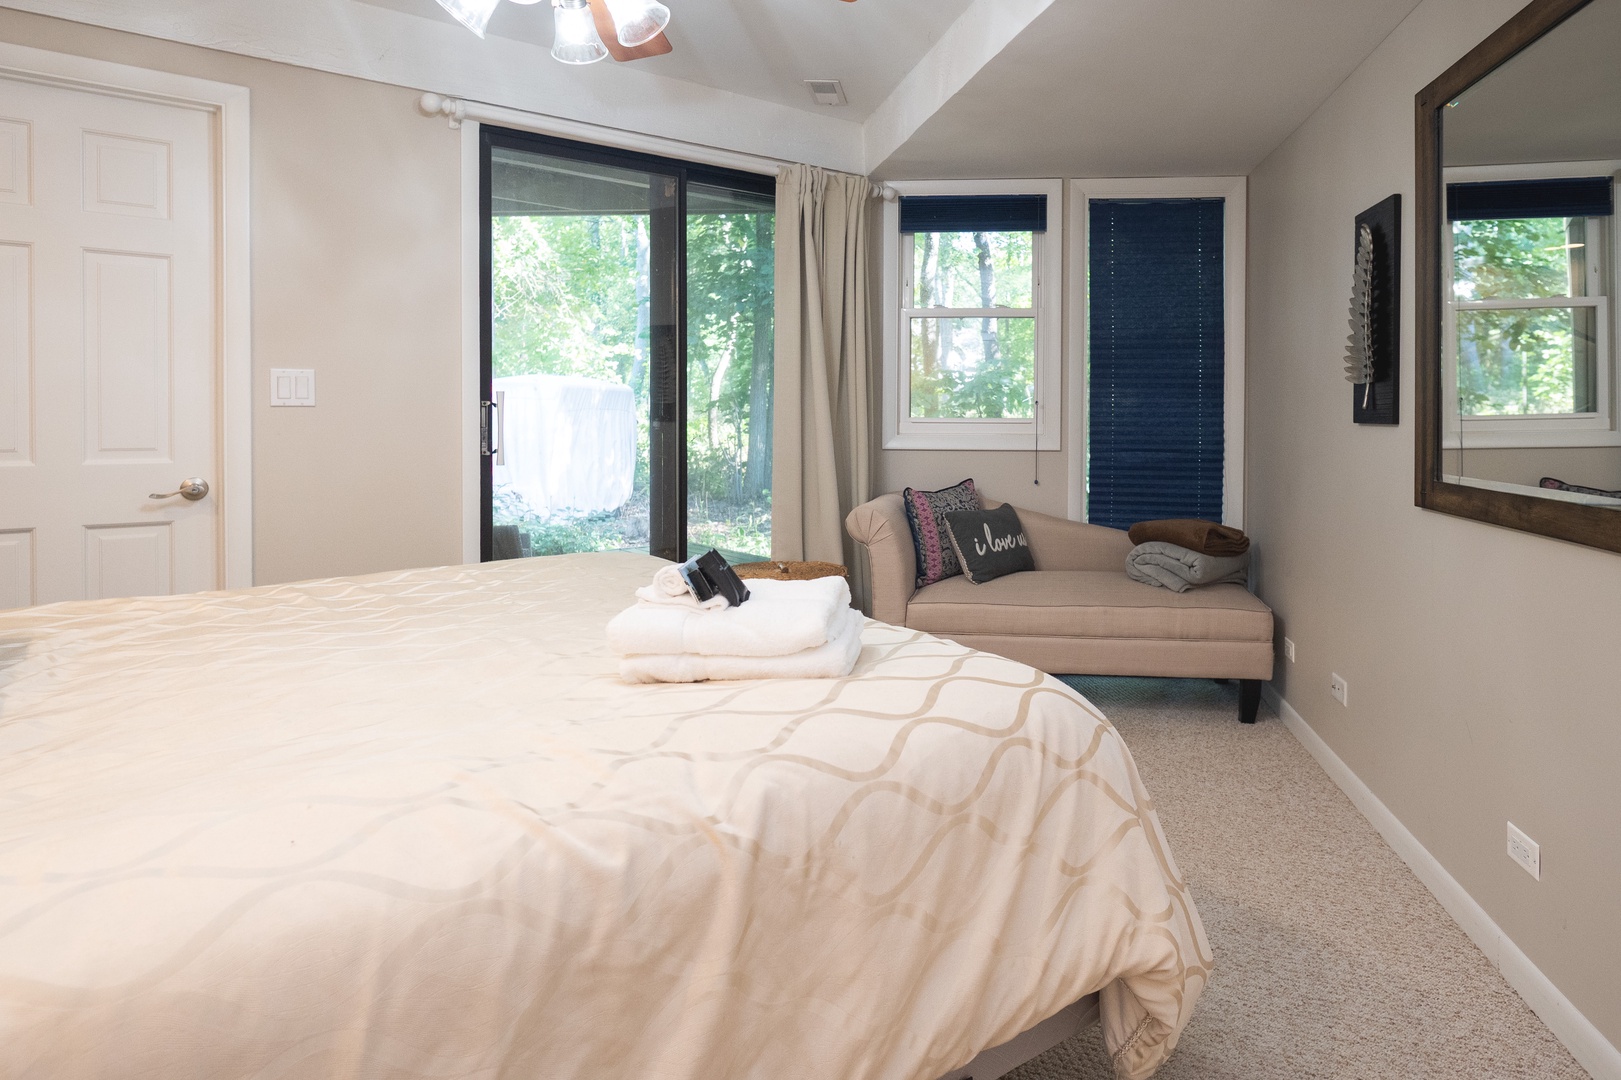 The master bedroom offers a king bed, sitting area, & deck access